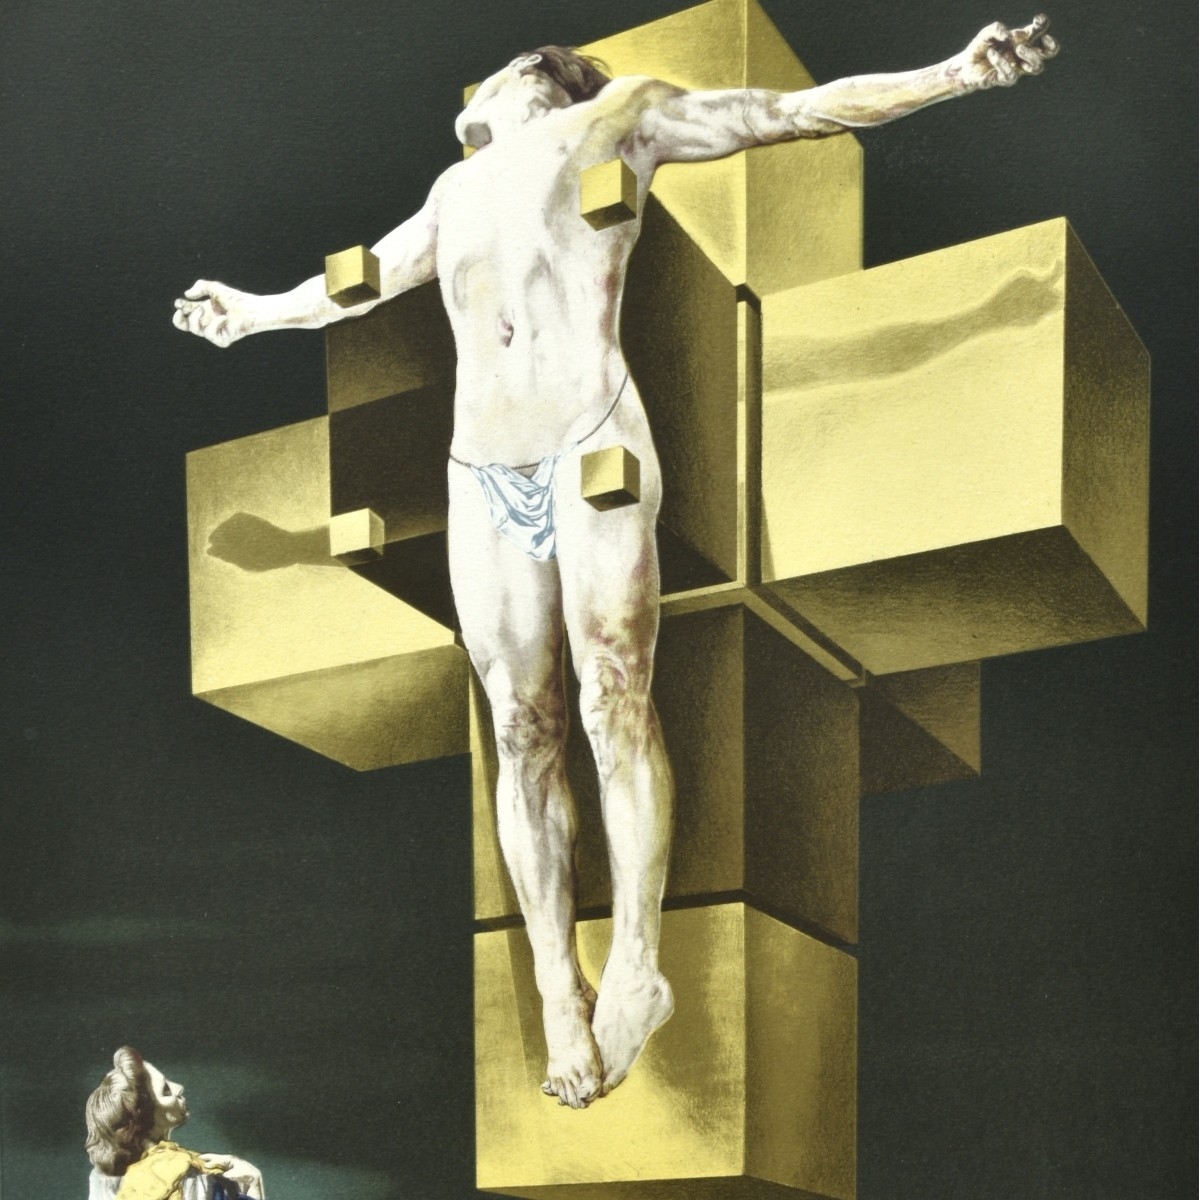 Artwork by Salvador Dalí, Crucifixion, Made of Lithograph on Paper